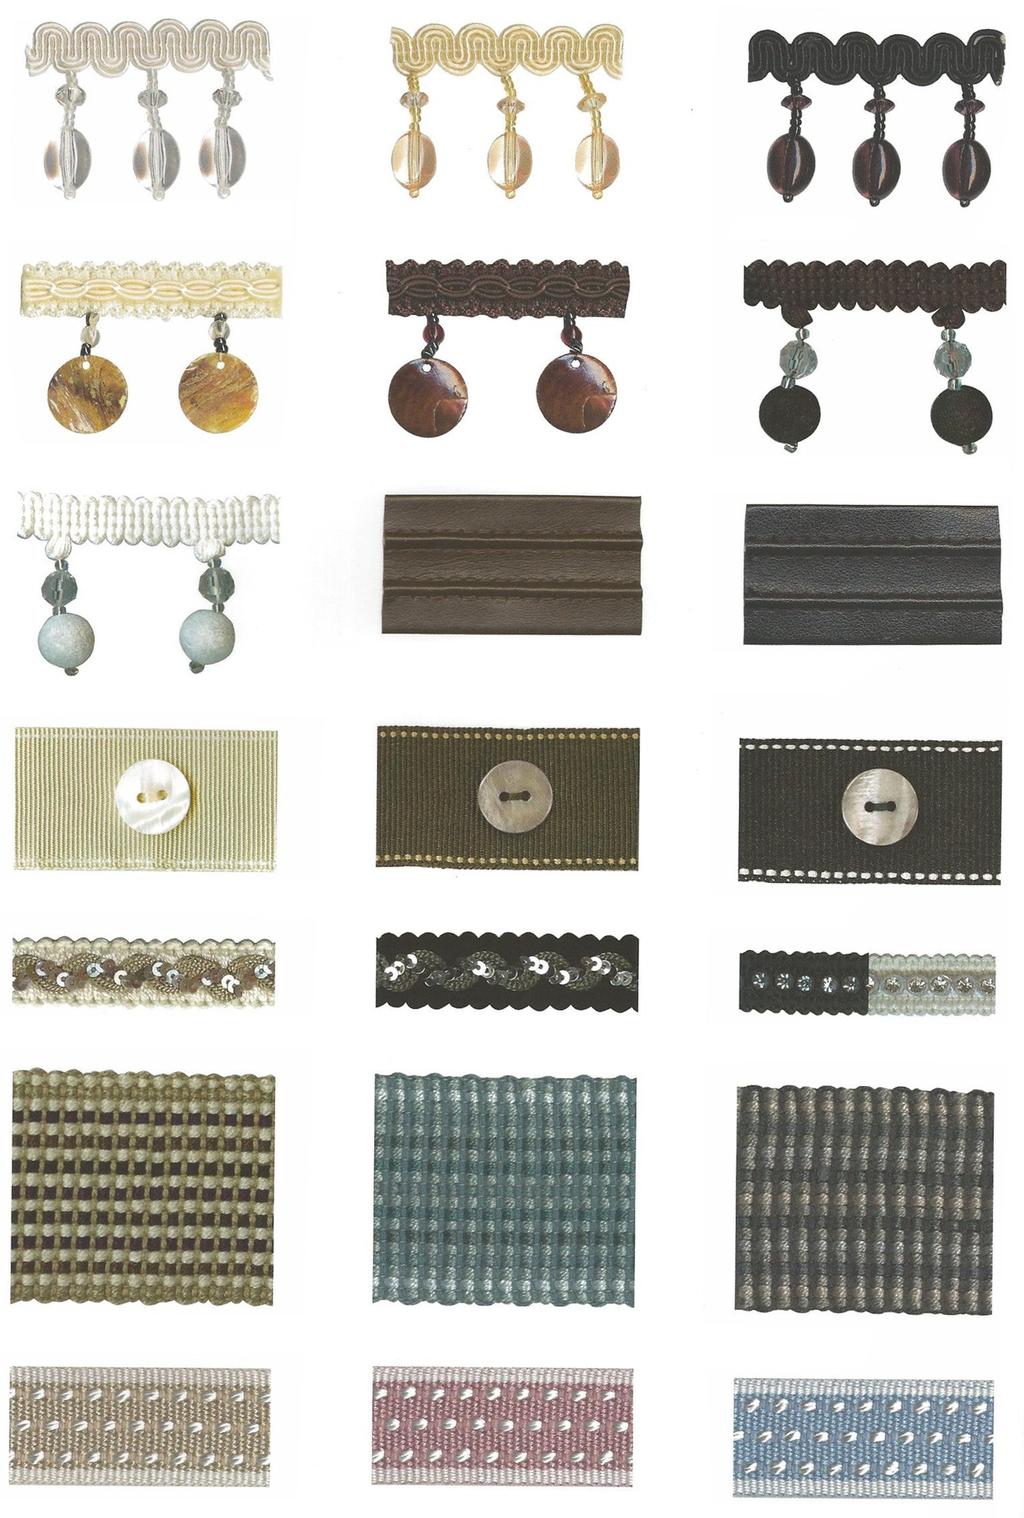 TRIMS THESE TRIMS ARE SAMPLED IN THE 2018 SOLARÉ SHADE COLLECTION. TRIM AND FURTHER ACCESSORIES ARE AVAILABLE IN ALL SOLARE SHADE COLLECTIONS.